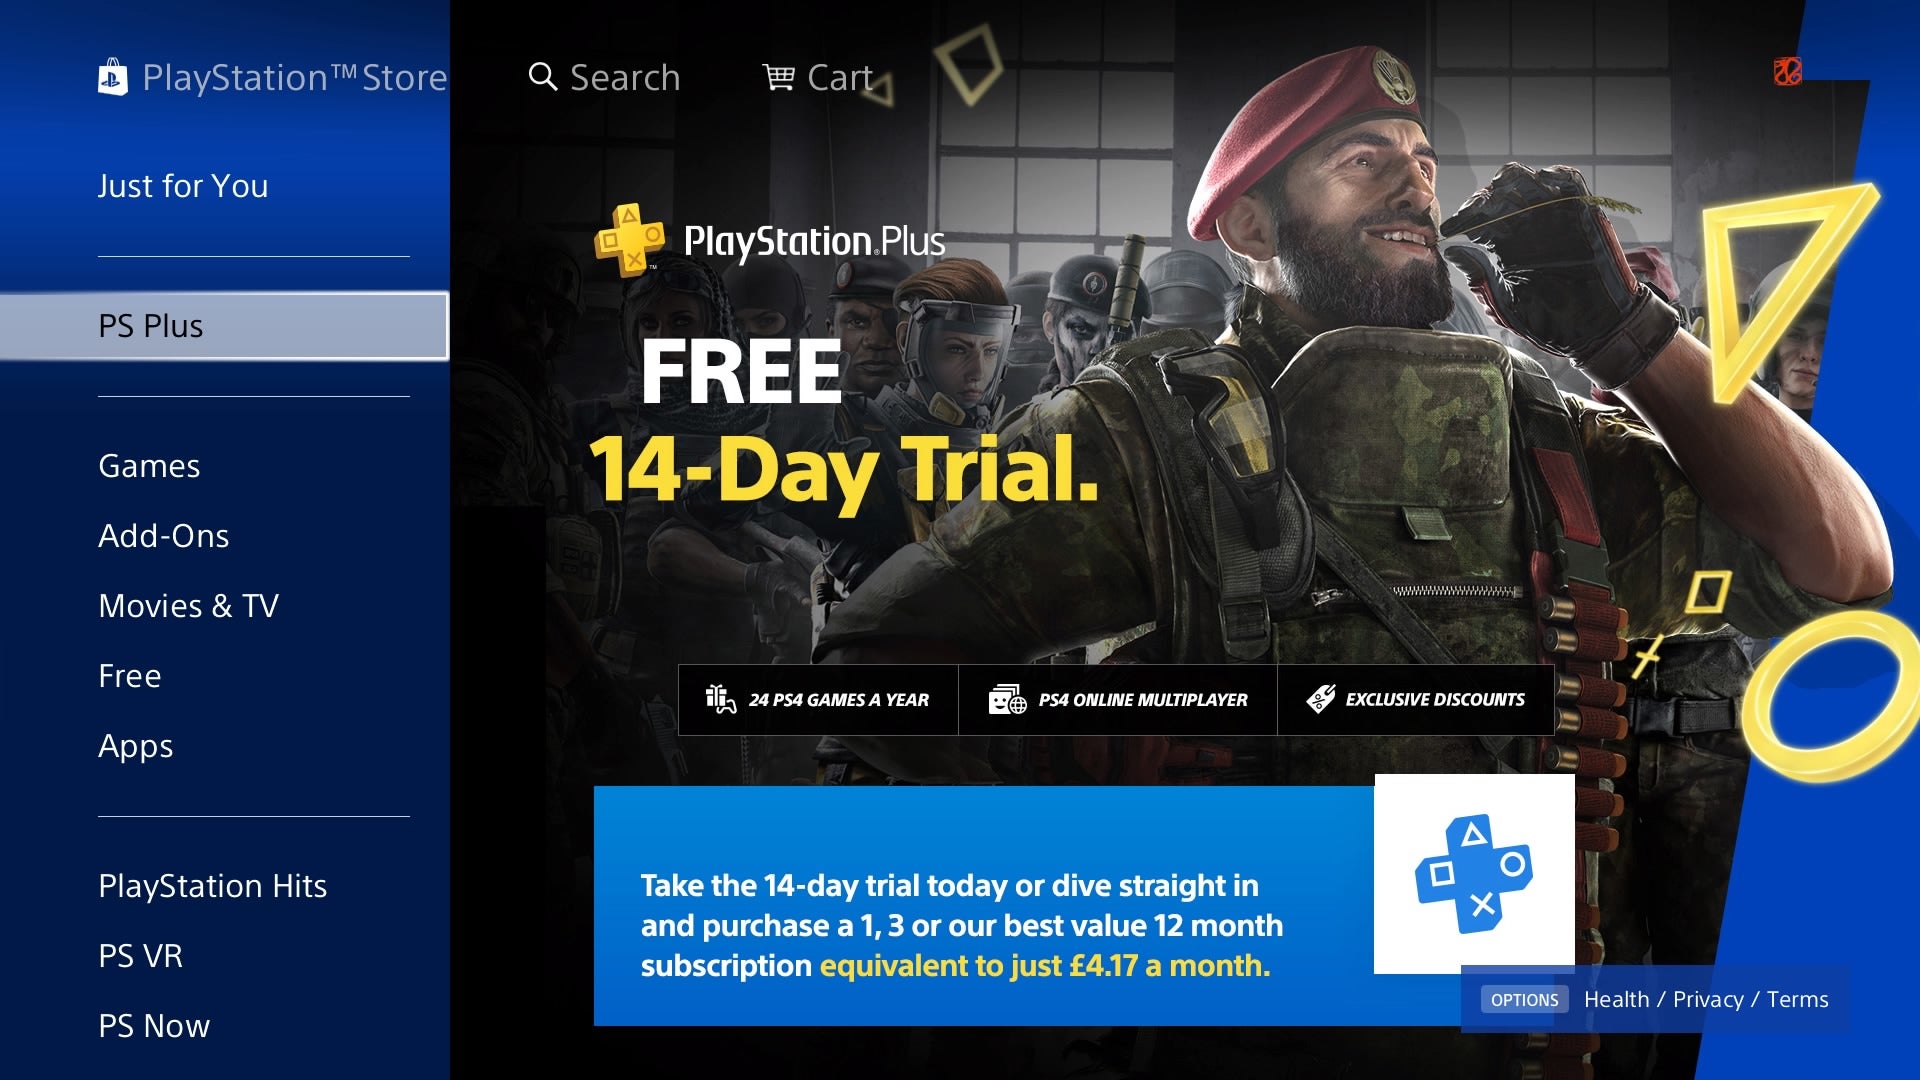 SONY PLAYSTATION Website|£117.81 A SALE|FREE Domain|FREE Hosting|FREE Traffic